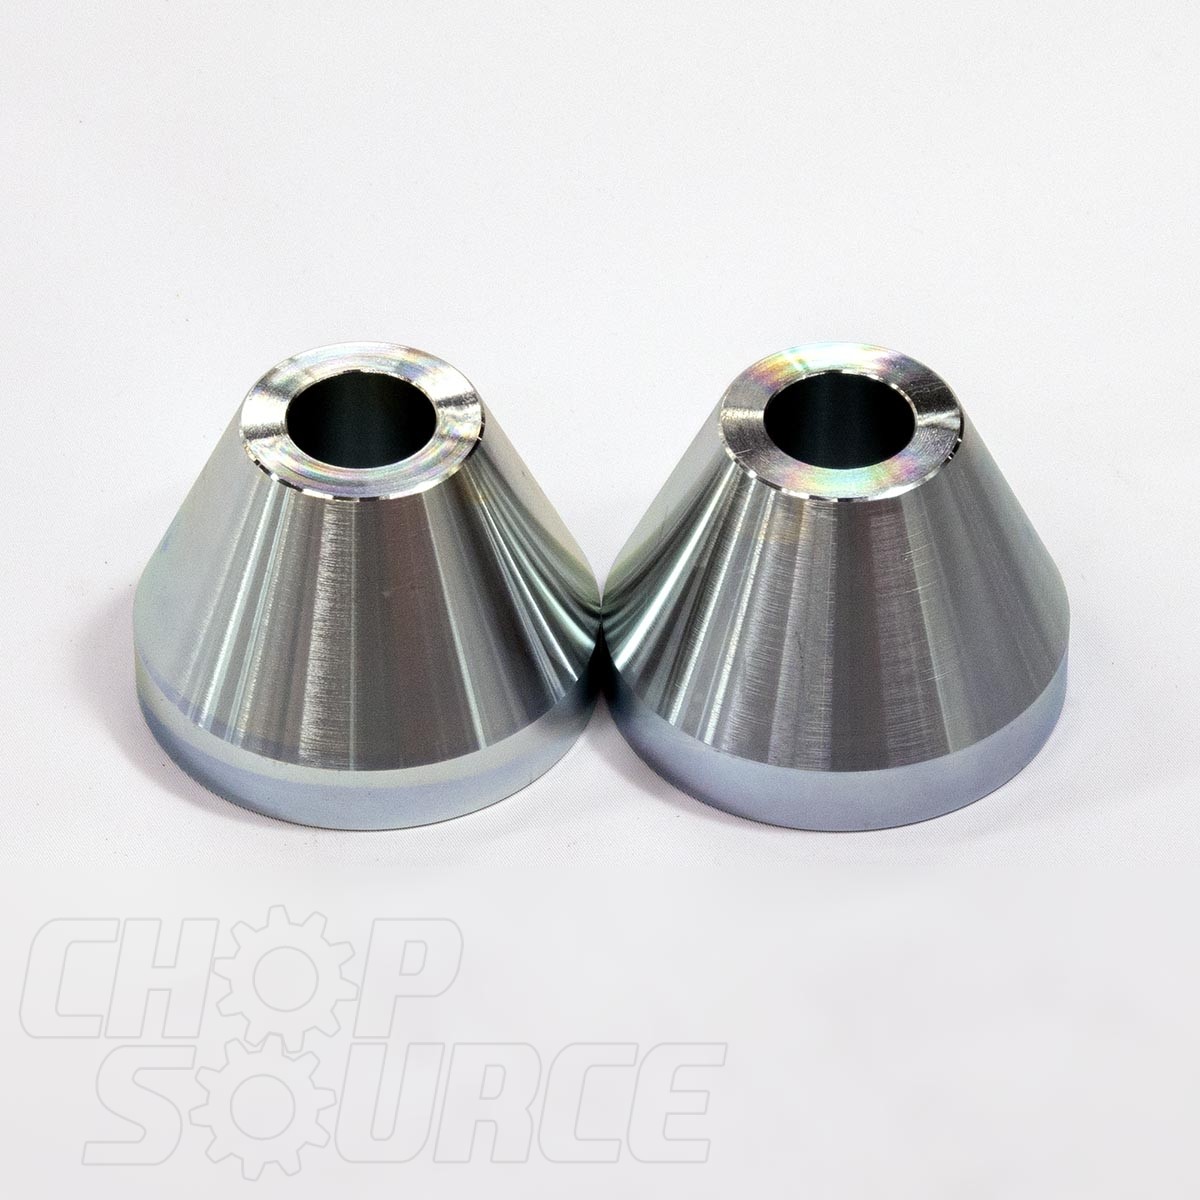 Bicycle Frame Jig/Fixture Bottom Bracket Cone Set - 303 Stainless Steel